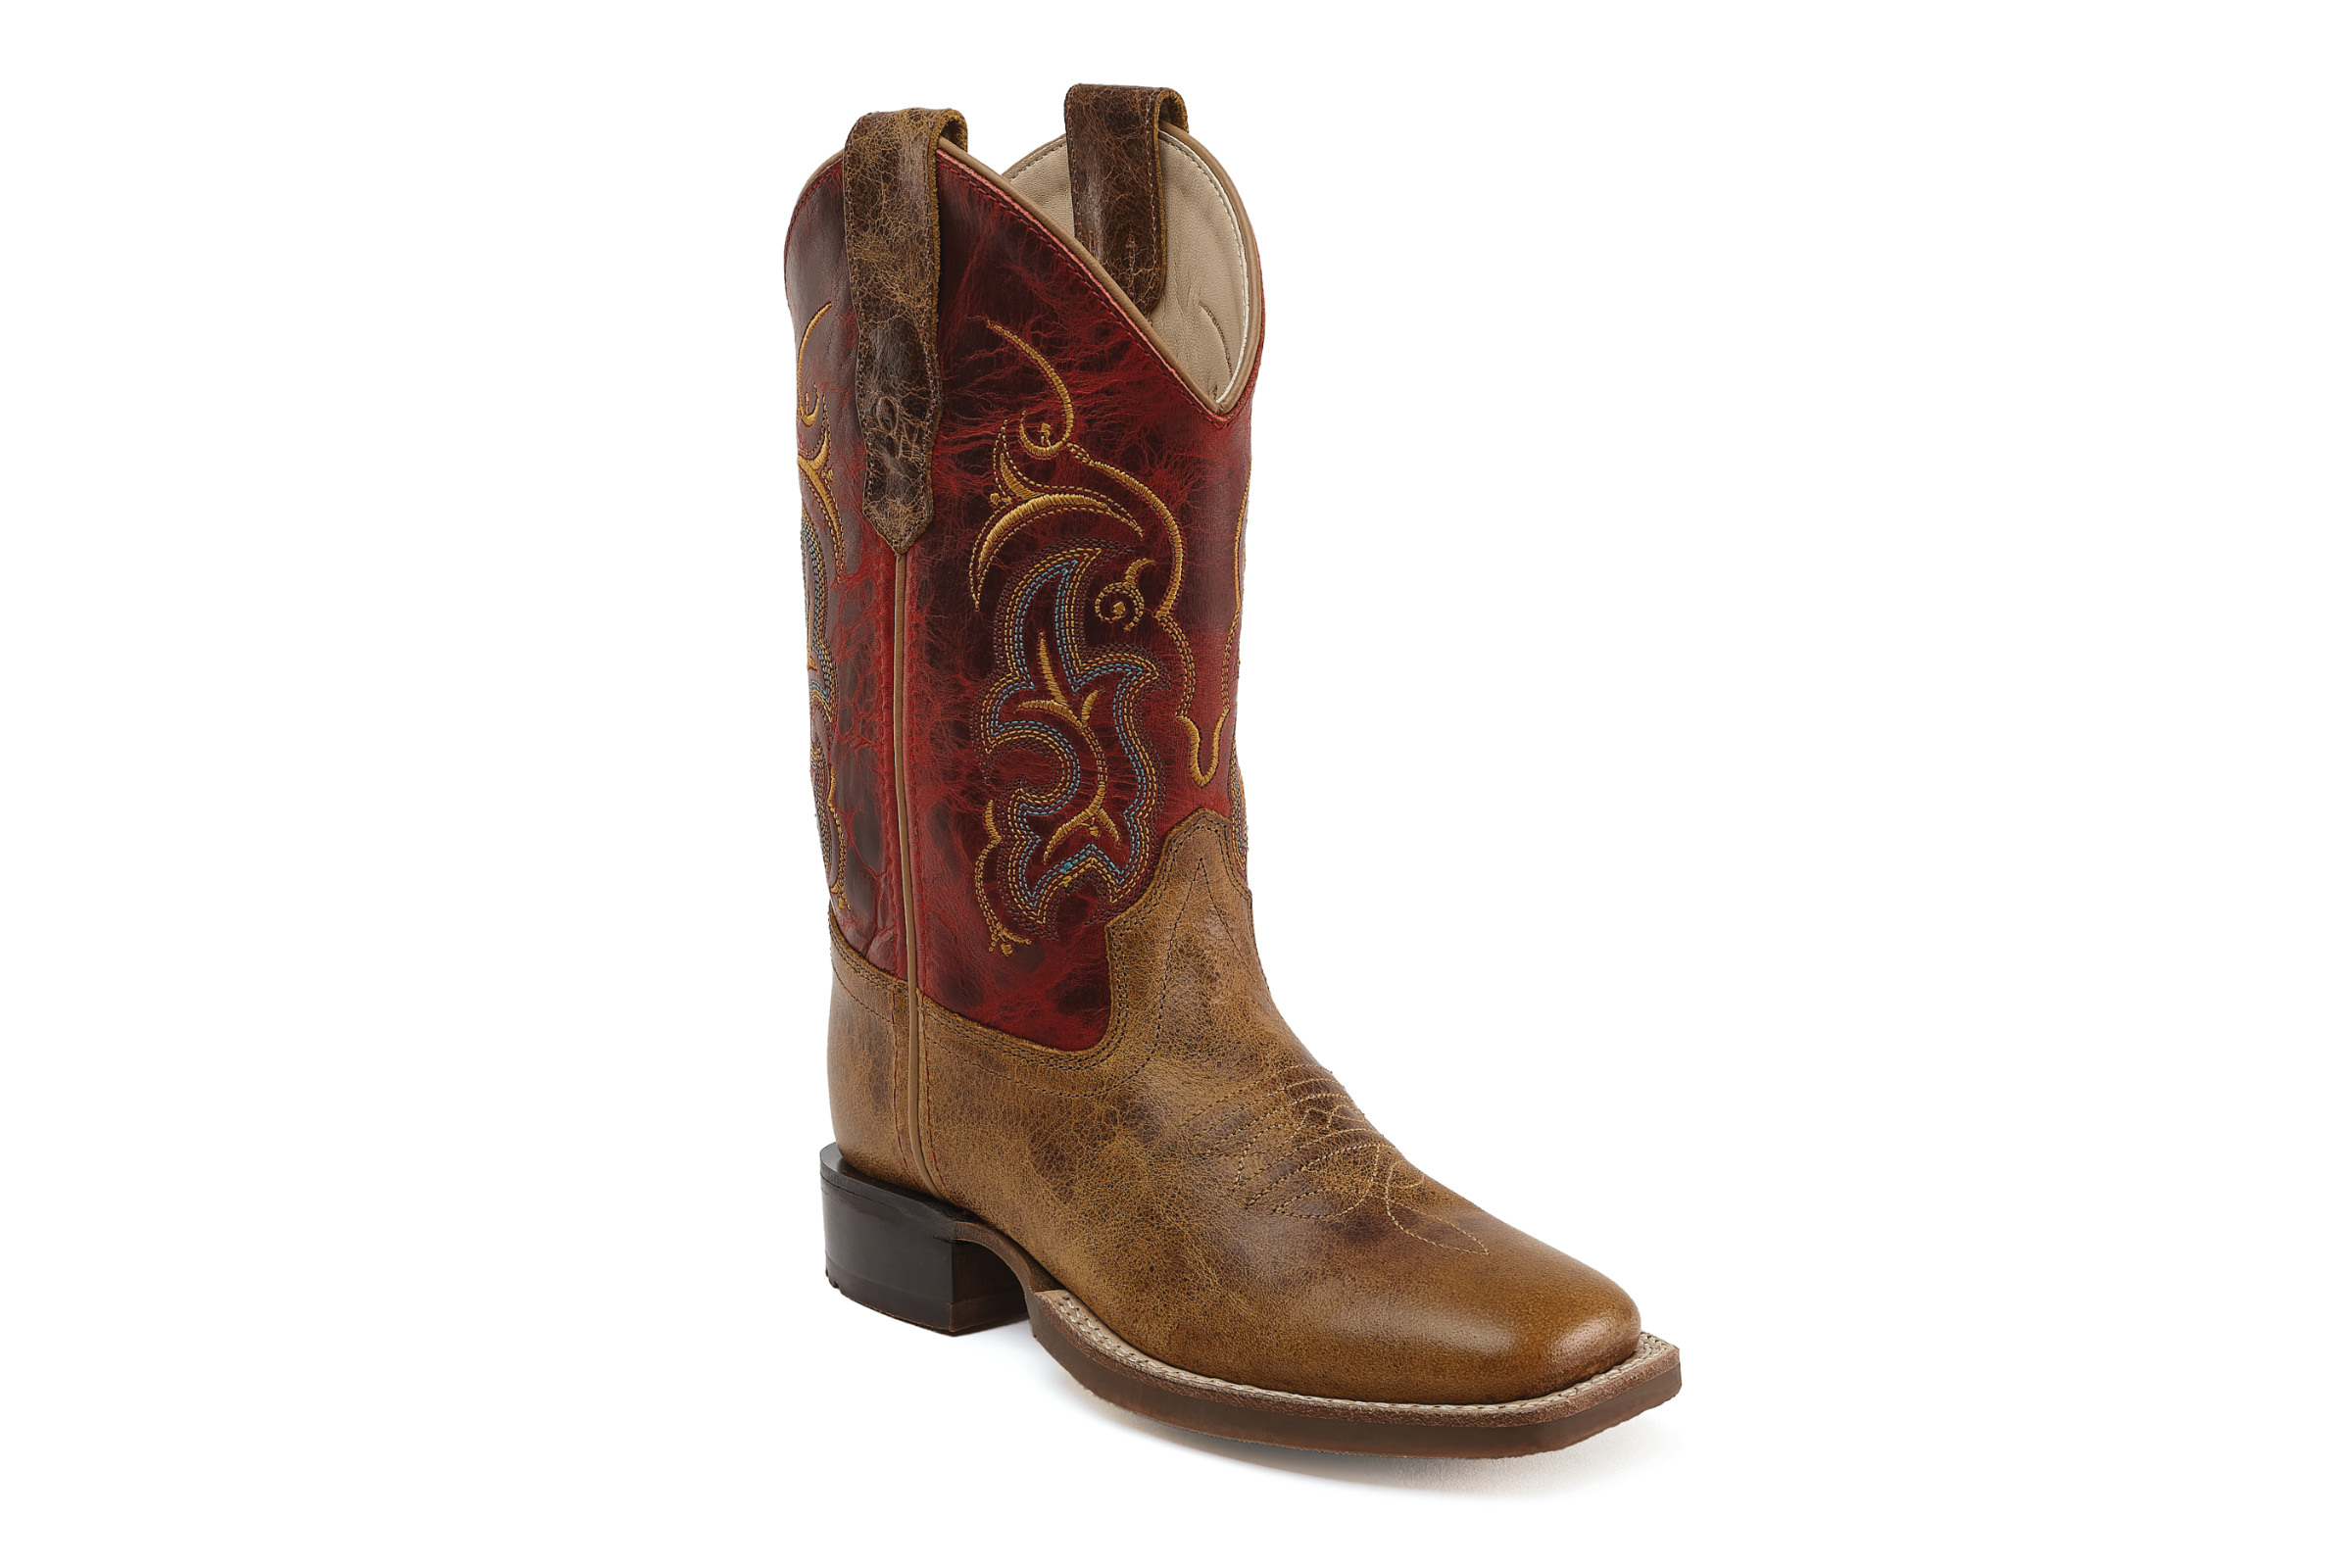 Cowboy boots for children "Gilman", brown/red